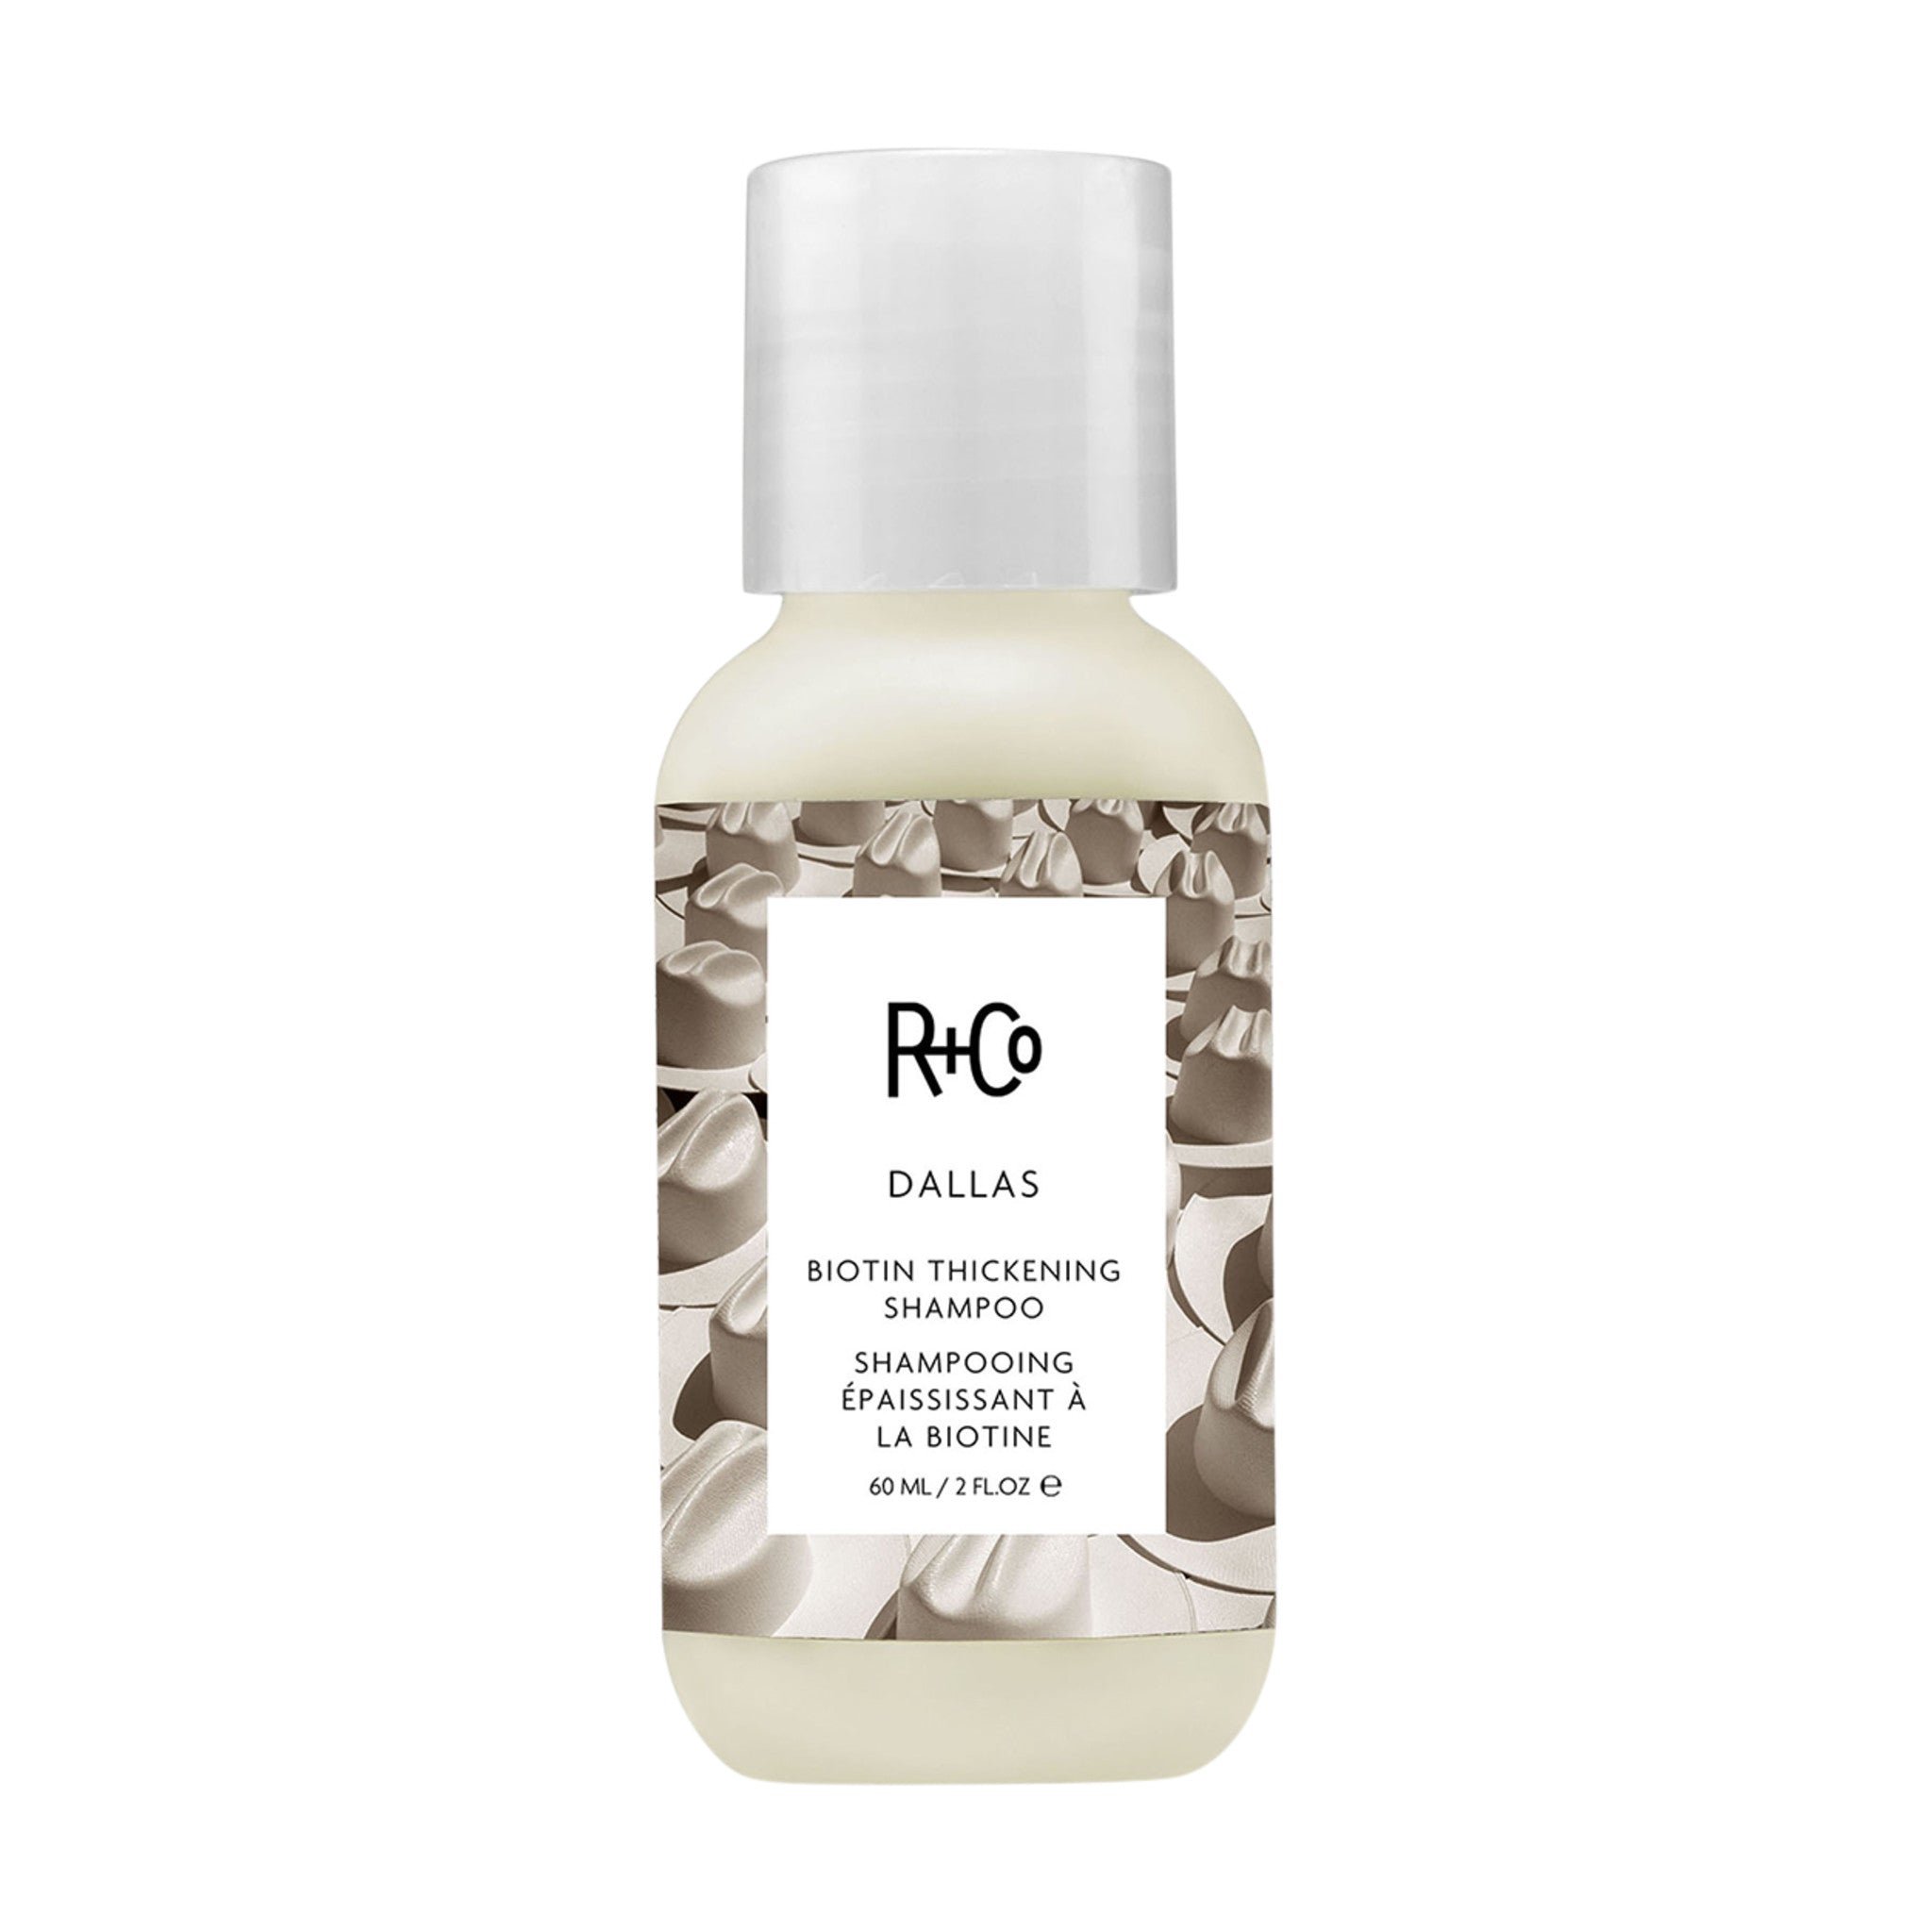 R+Co Travel Size Products - Buy More & Save More - FREE SHIP